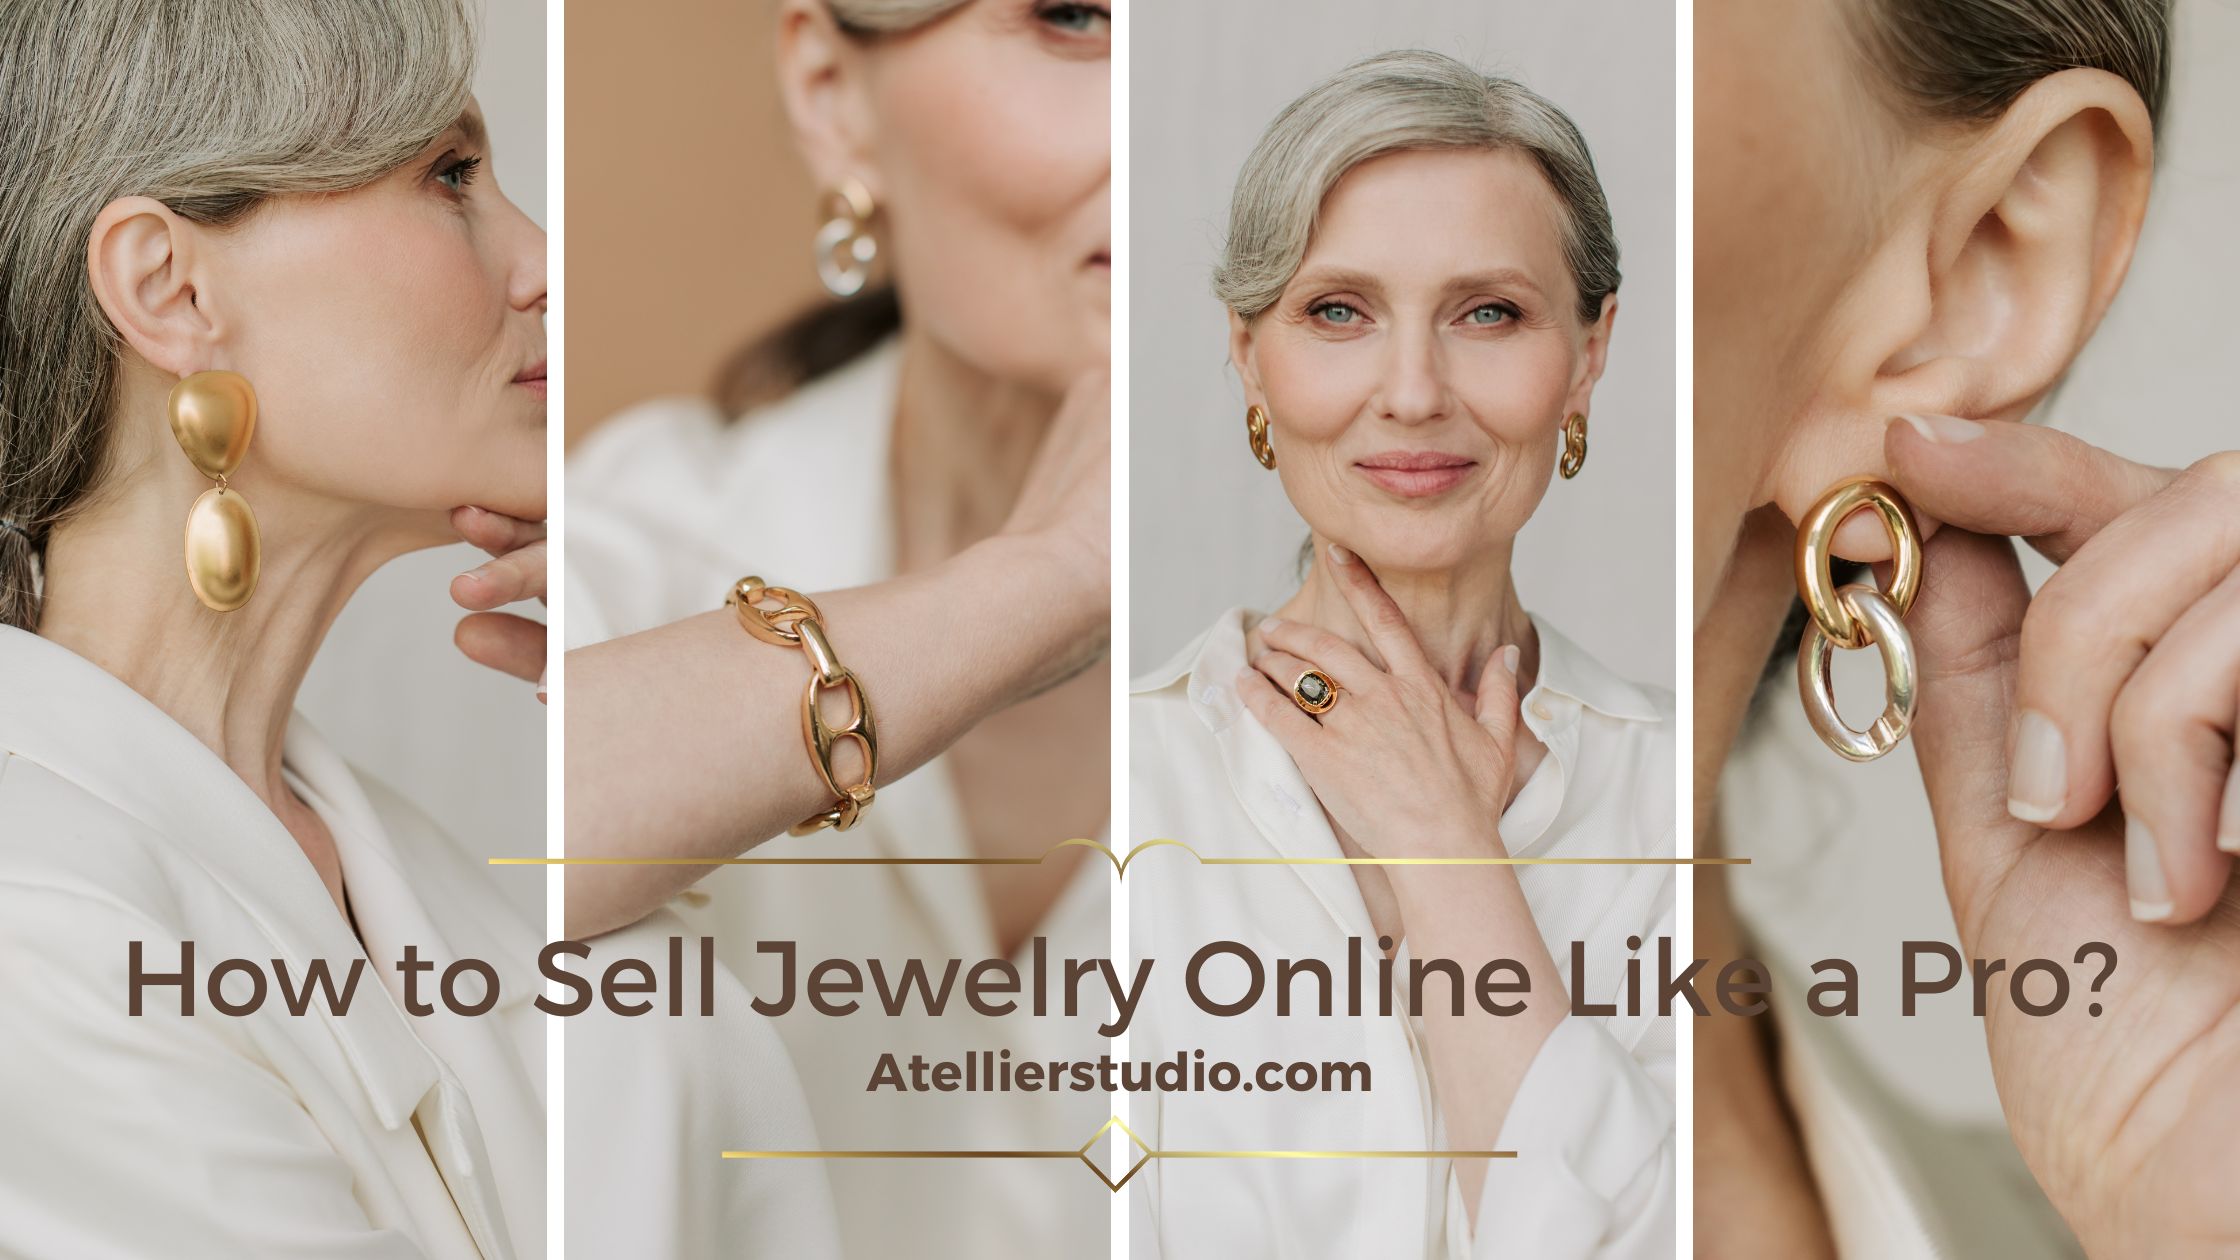 How to Sell Jewelry Online Like a Pro?